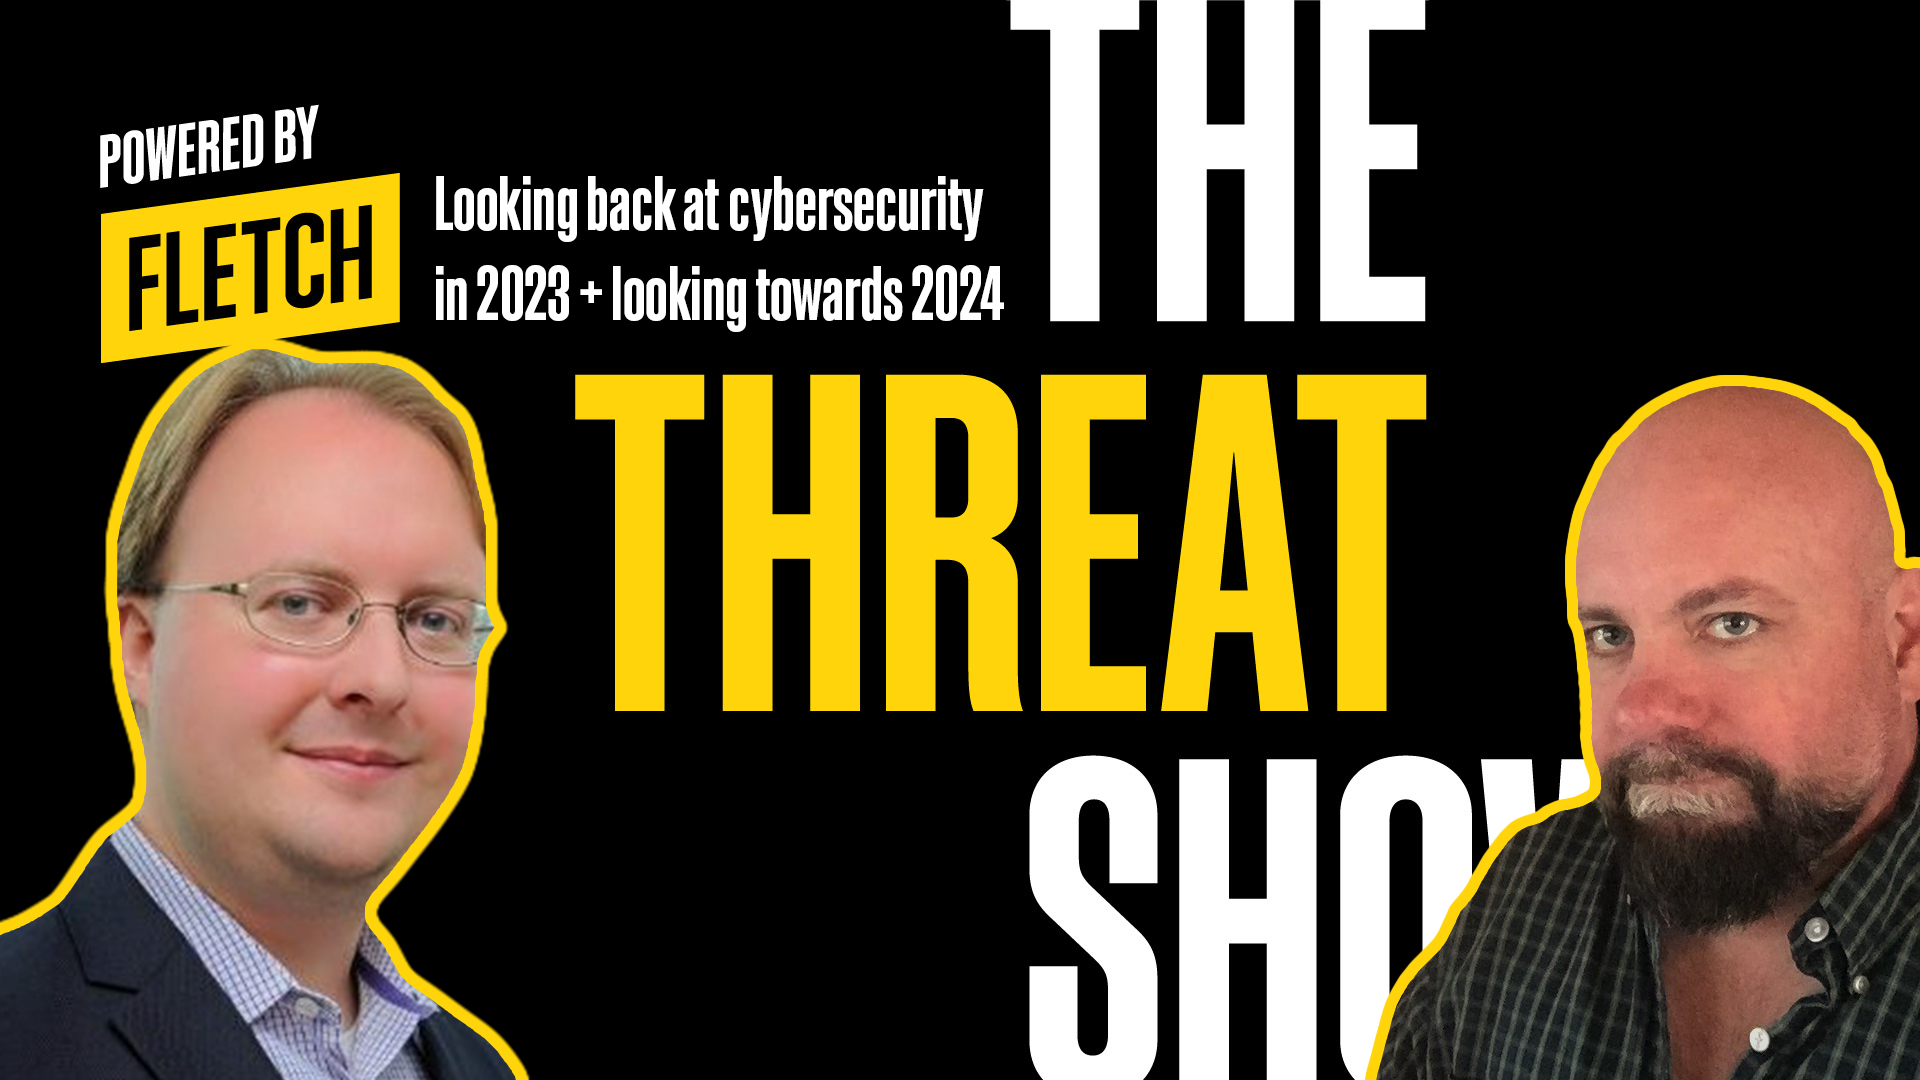 The Threat Show Ep. 39 / Cybersecurity in 2023